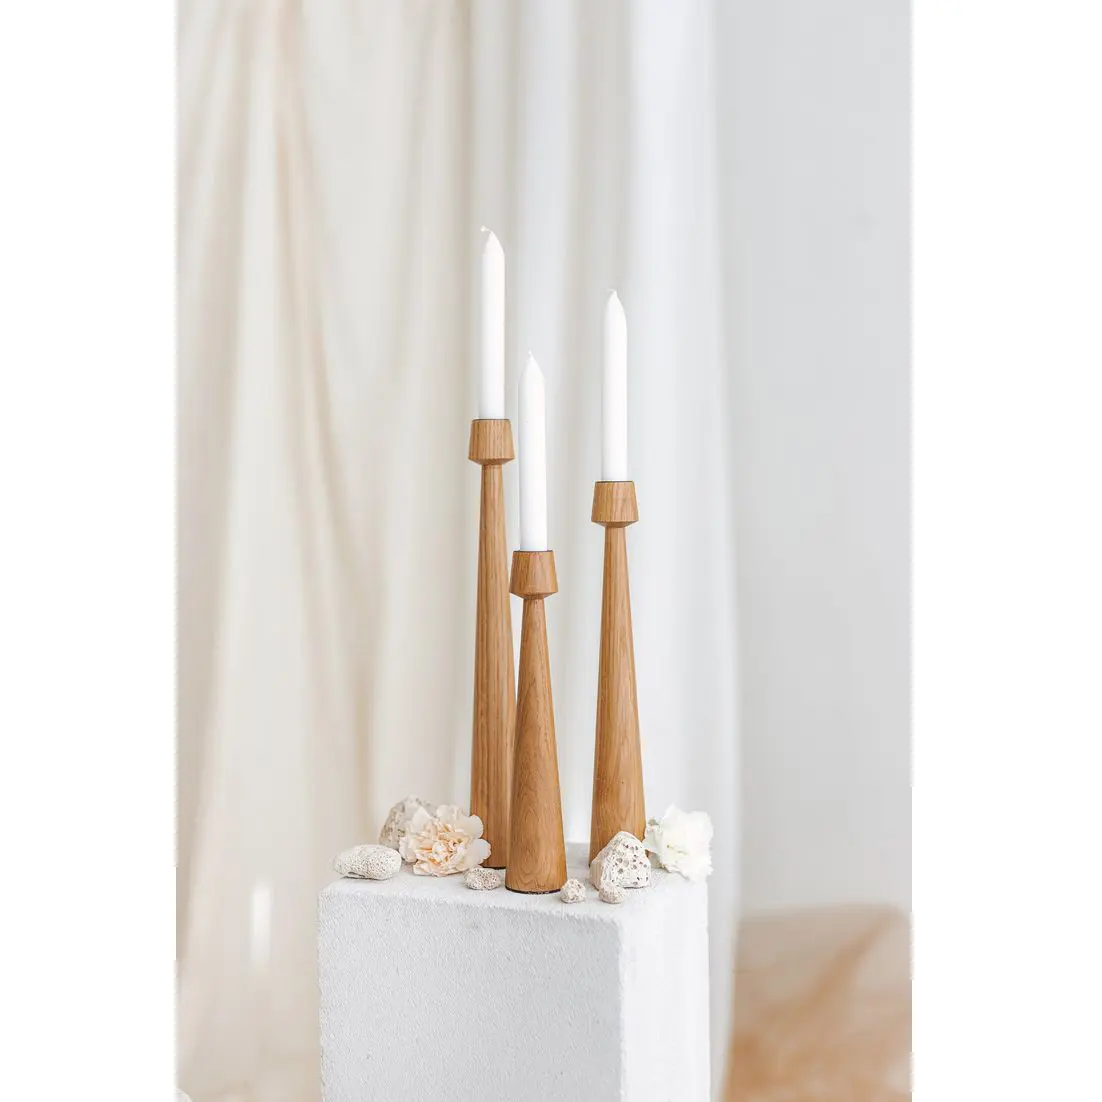 Best Creative Multifunctional Use Tall Acacia Wood Candle Holder For Home Decor & Wedding Decor Wholesale Price In 3 Pcs Decor